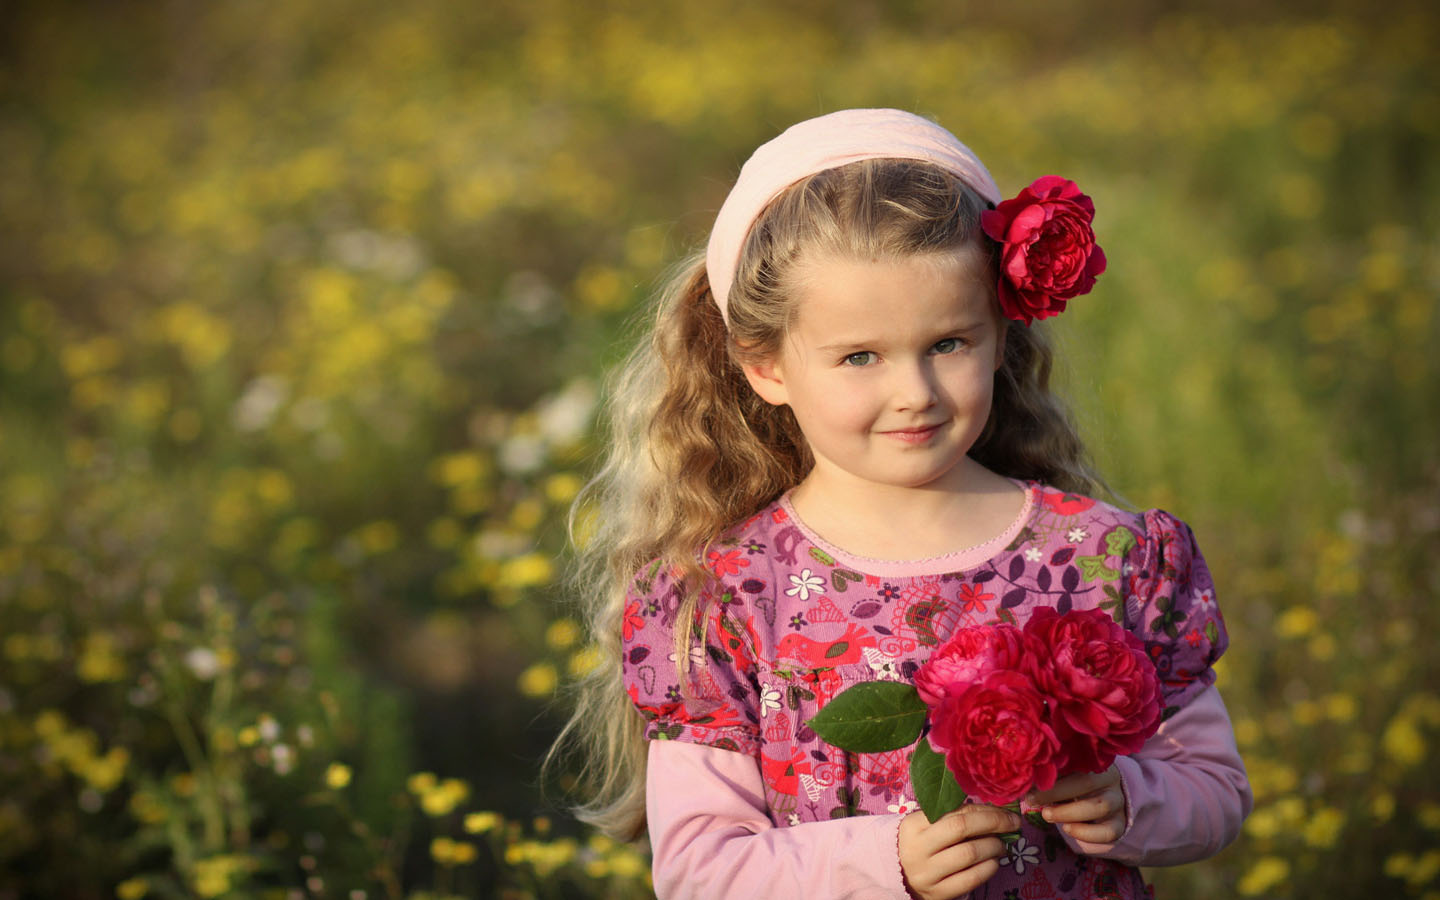 cute girl with flowers hd image wallpaper free for facebook profile pic